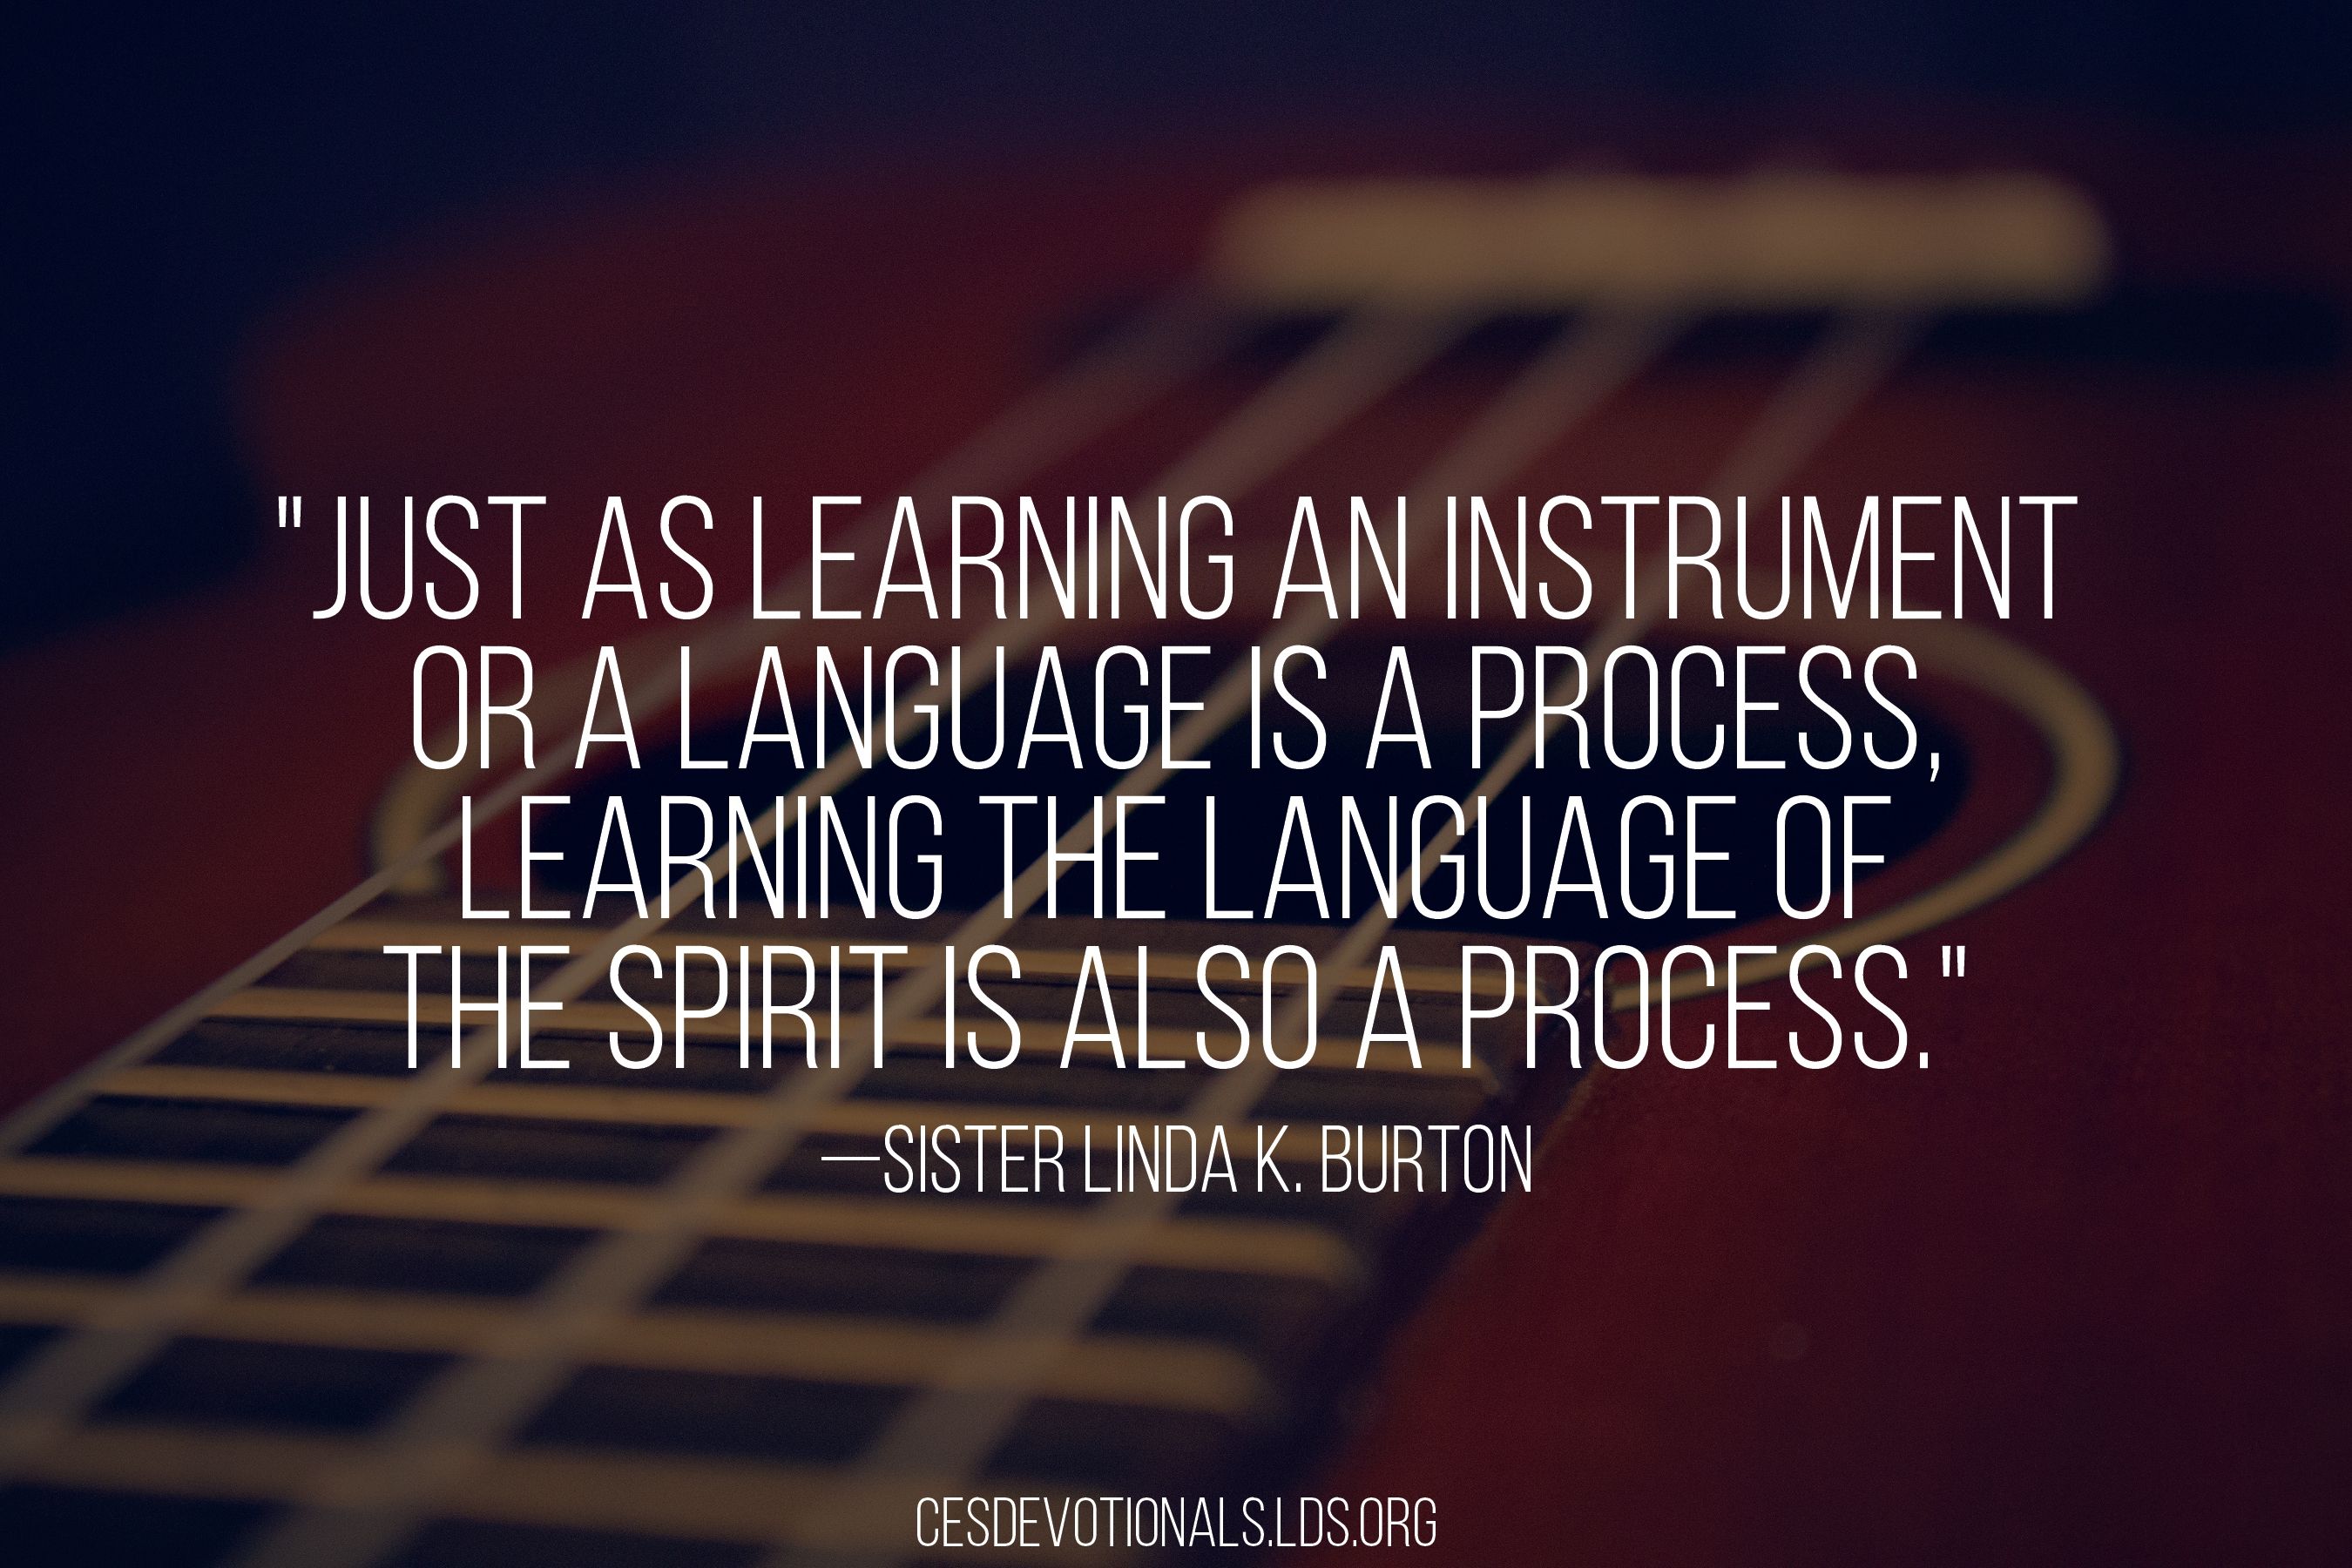 “Just as learning an instrument or a language is a process, learning the language of the Spirit is also a process.”—Sister Linda K. Burton, “Tuning Our Hearts to the Voice of the Spirit” © undefined ipCode 1.